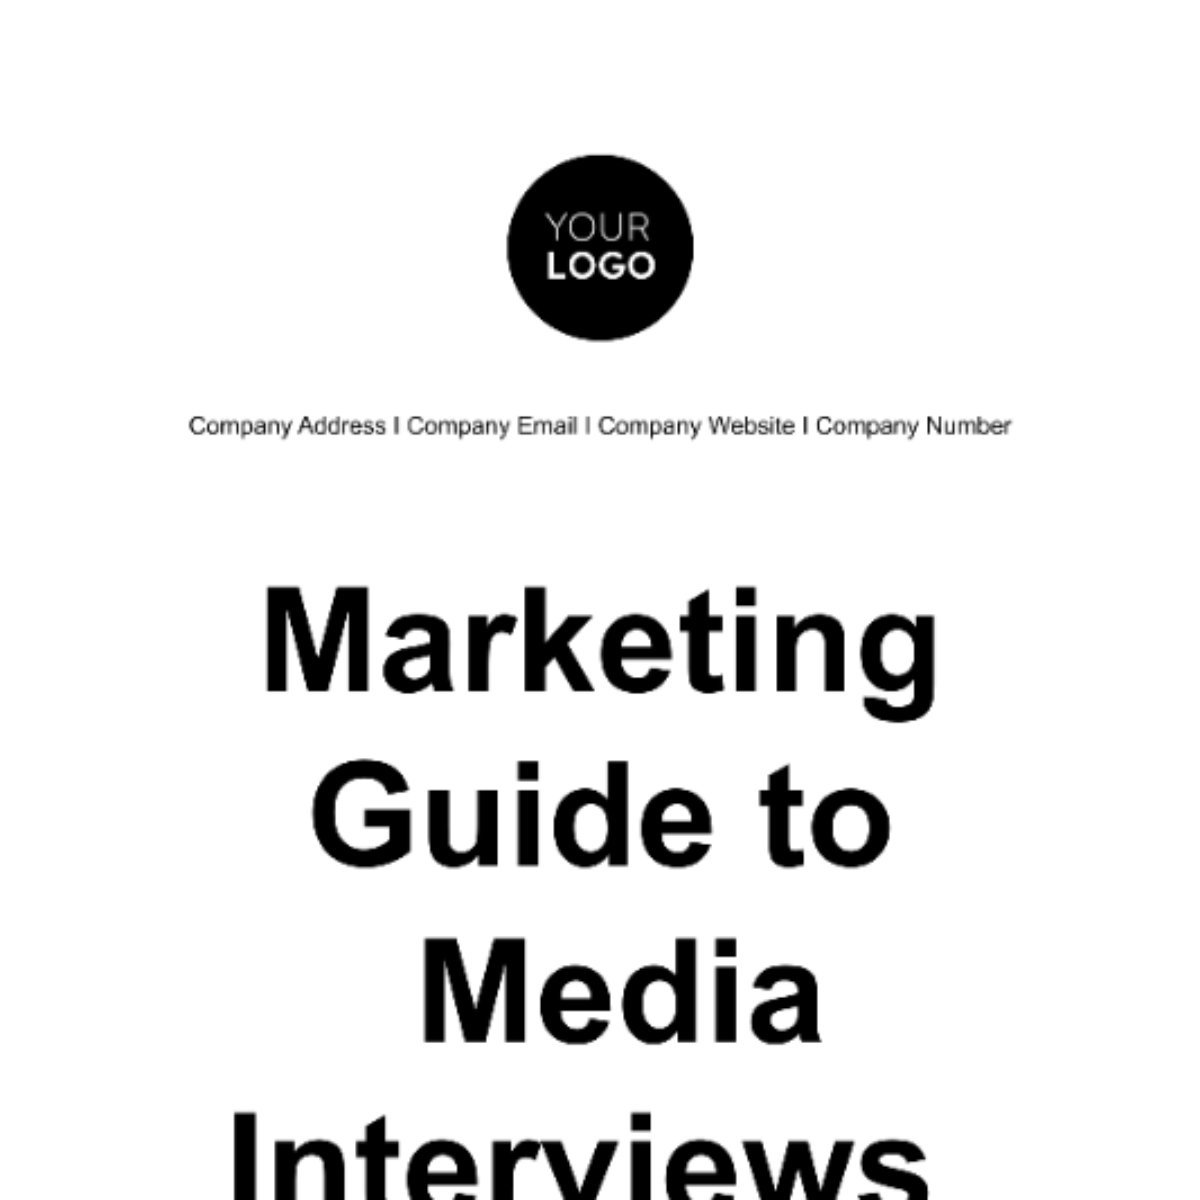 Marketing Guide to Media Interviews Template